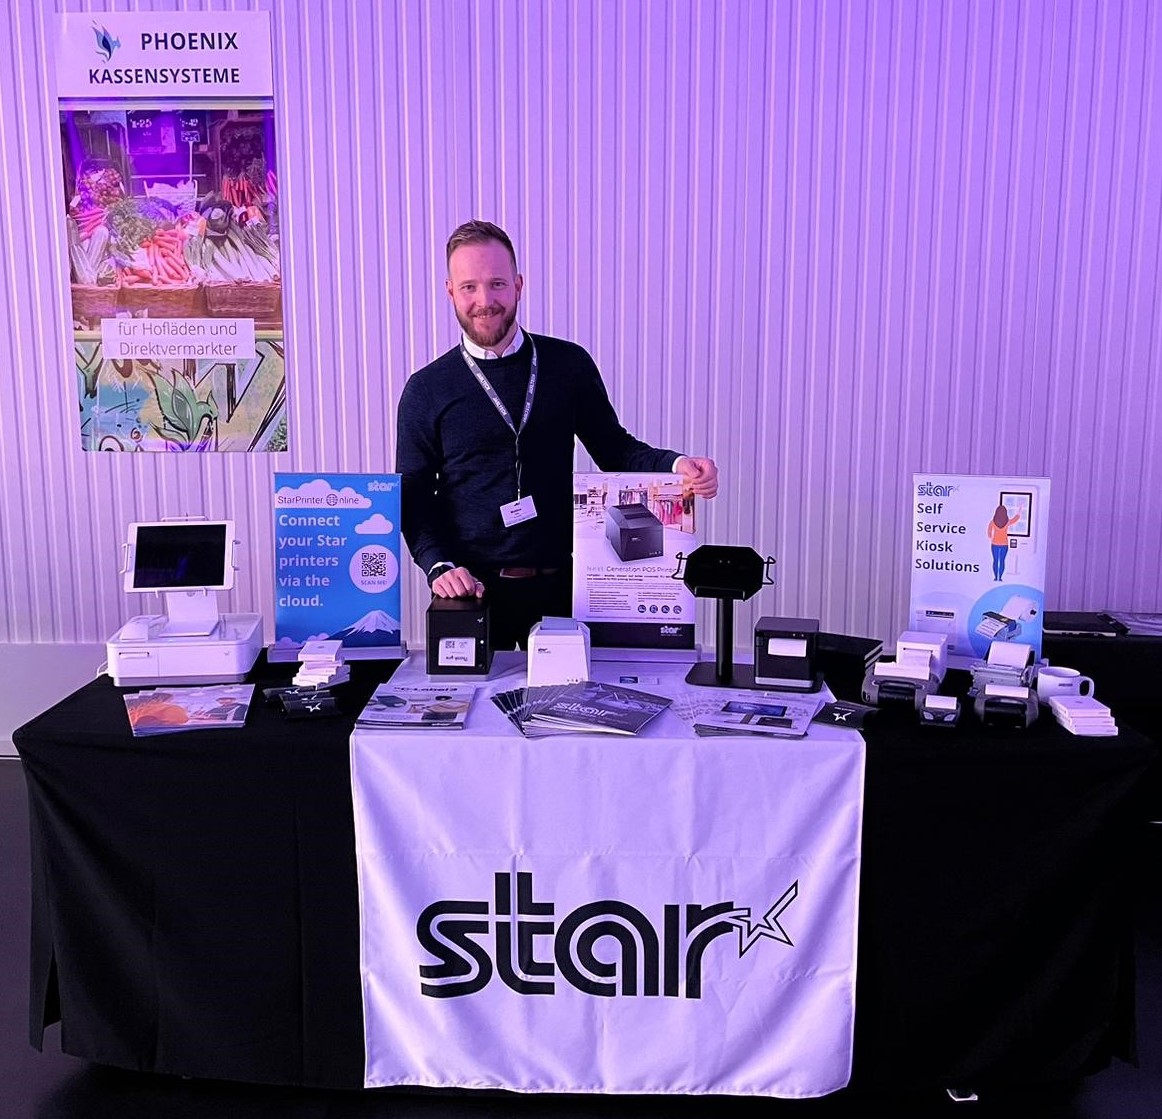 A big thanks to POSBill and Jarltech for hosting Star today. It was great to catch up and display our innovative point of sale solutions! #possolutions